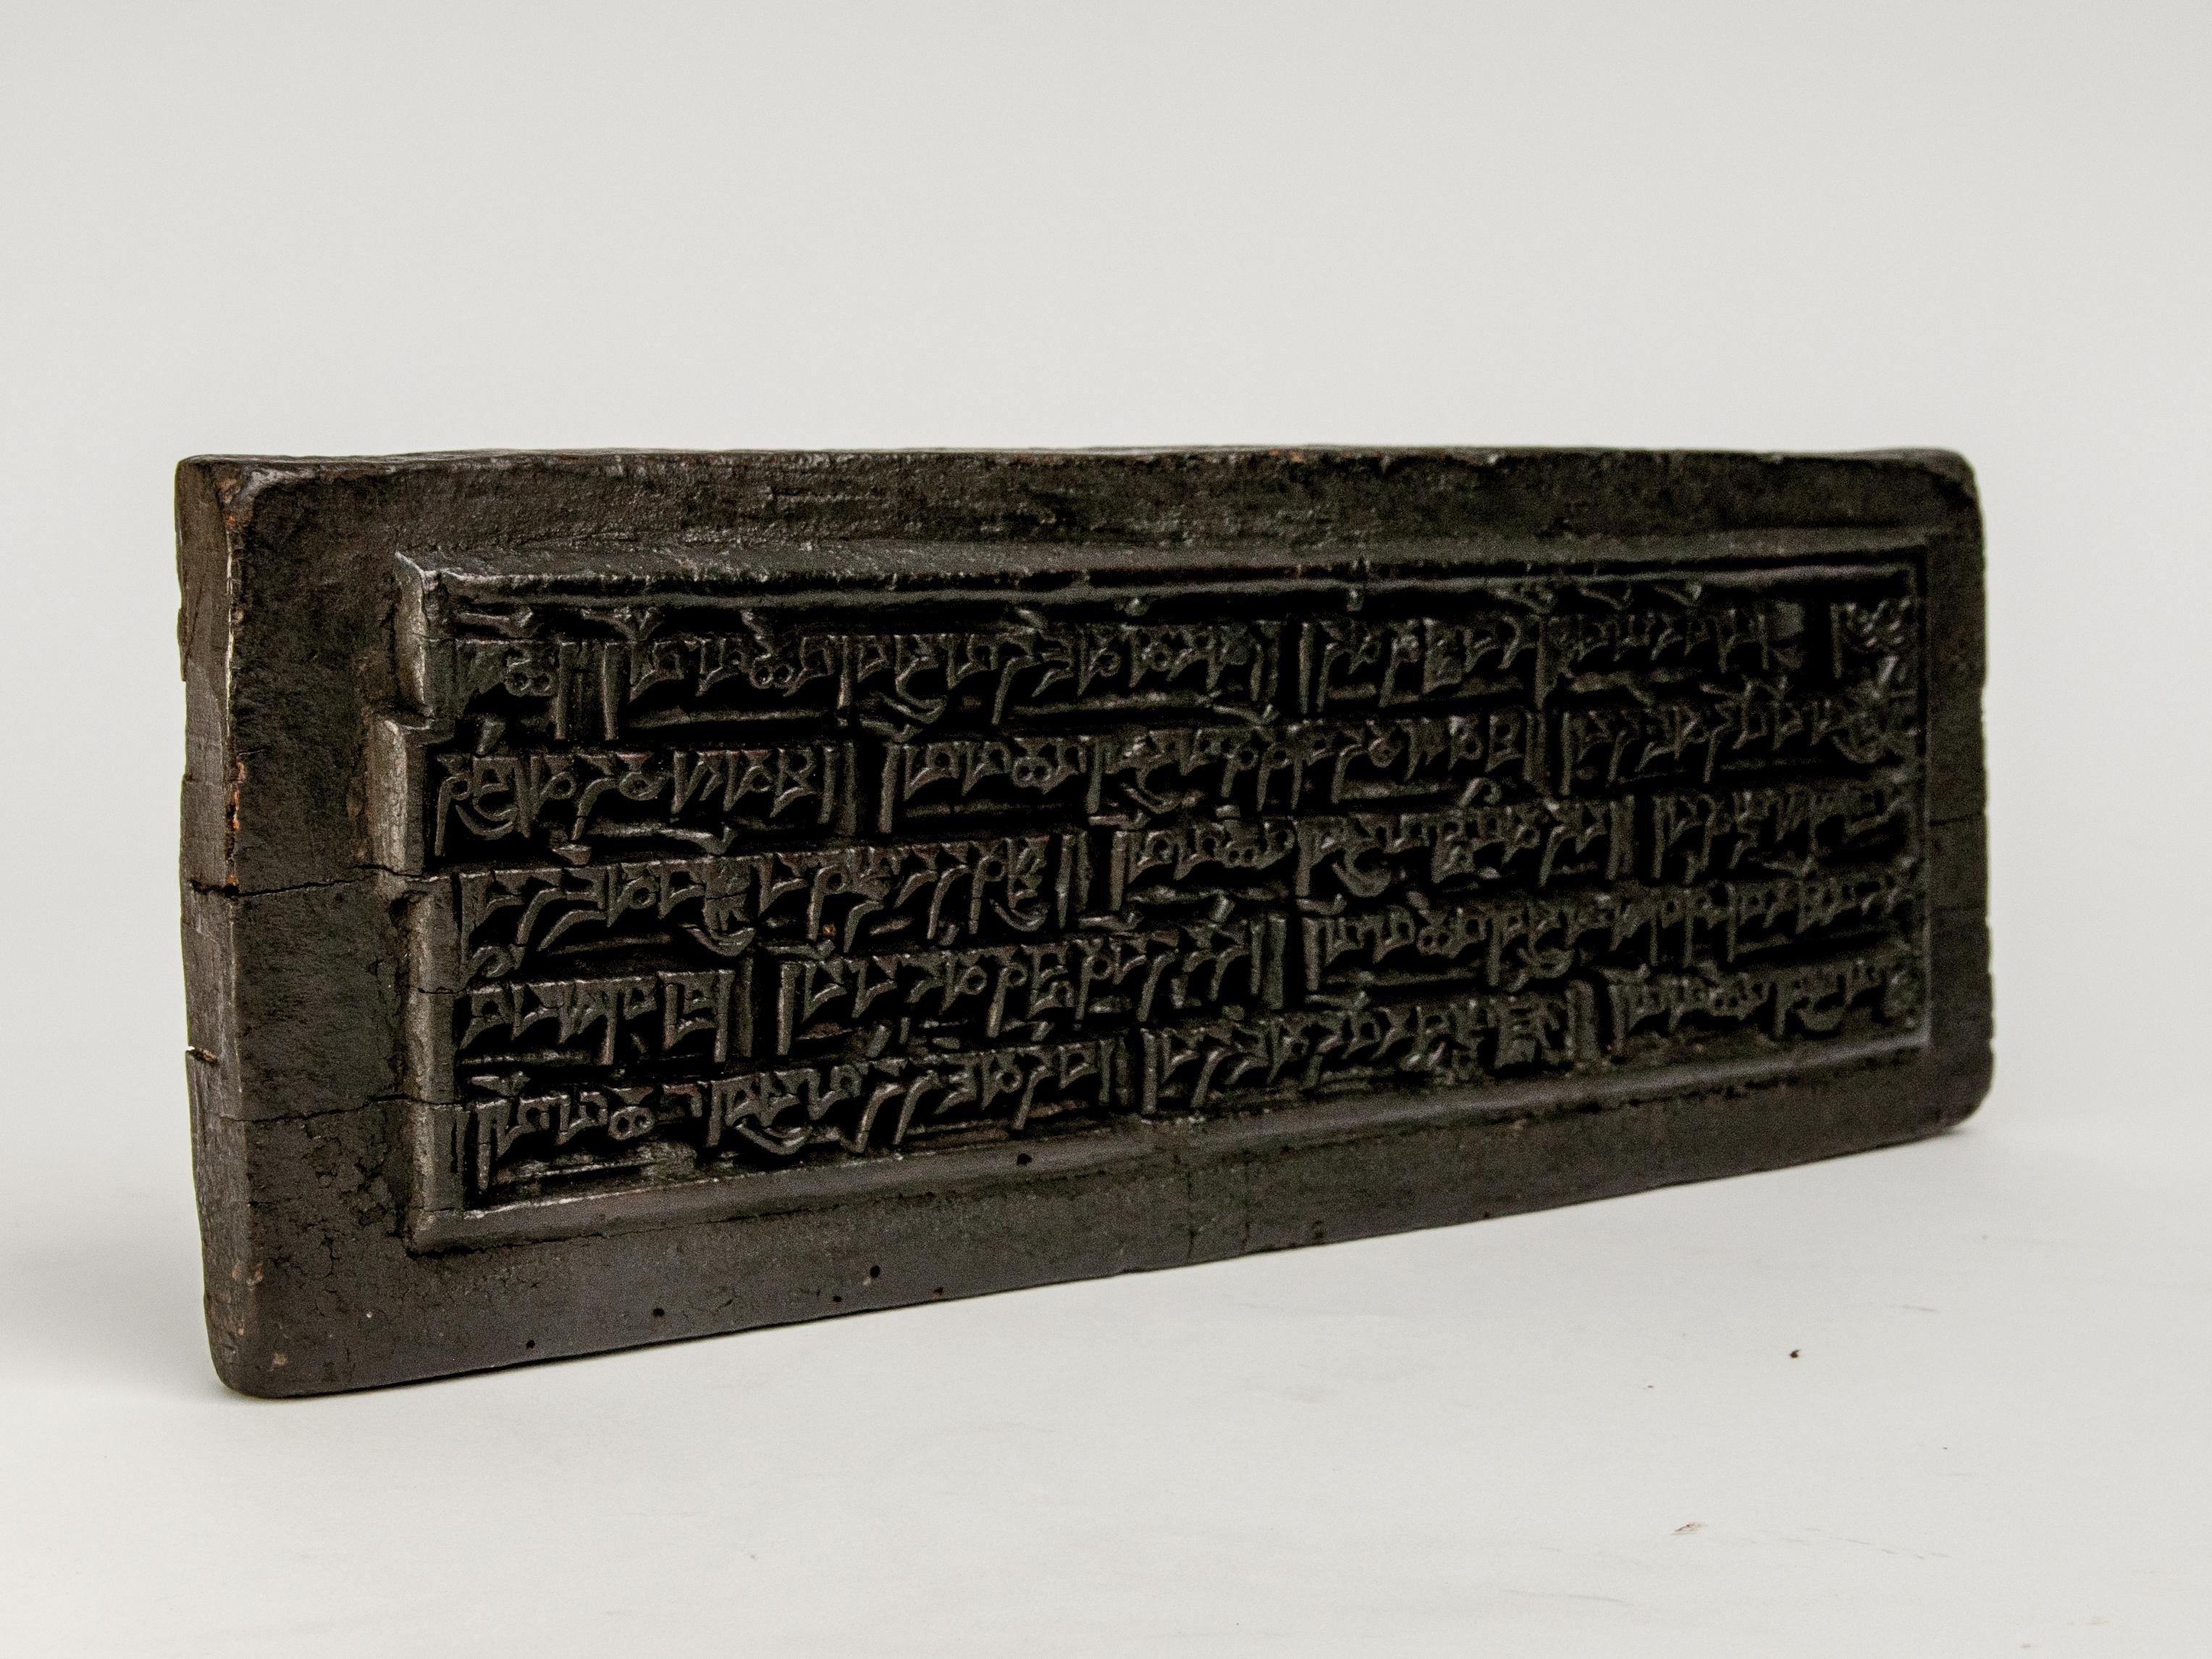 Tibetan Wood Print Block Hand-Carved Tibet Early 20th Century Religious Text